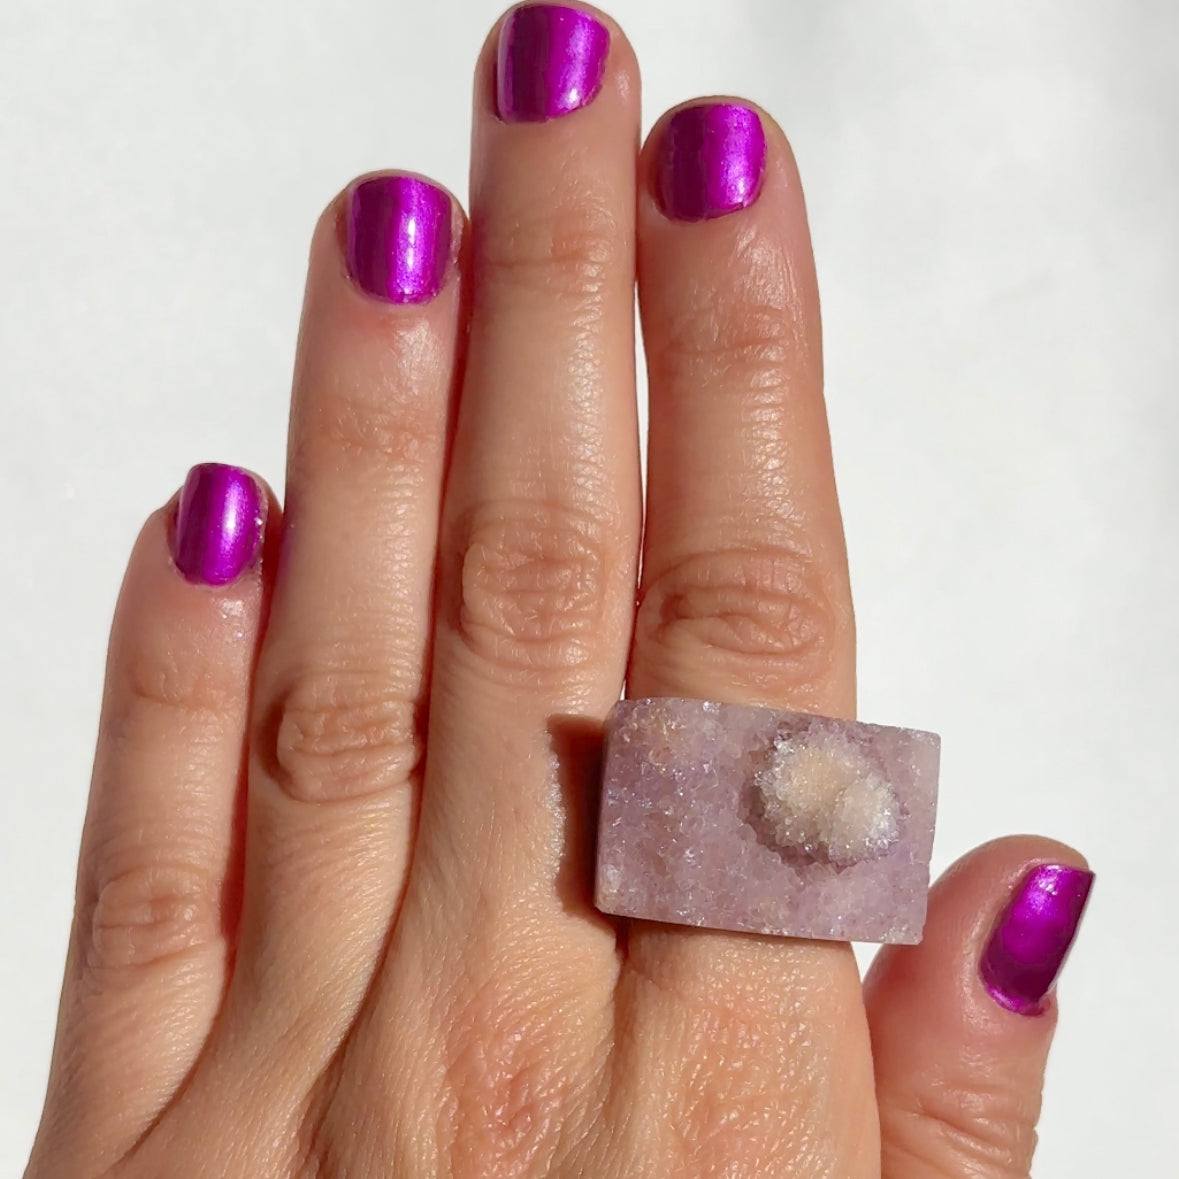 Carved Rock Ring - Pink Amethyst